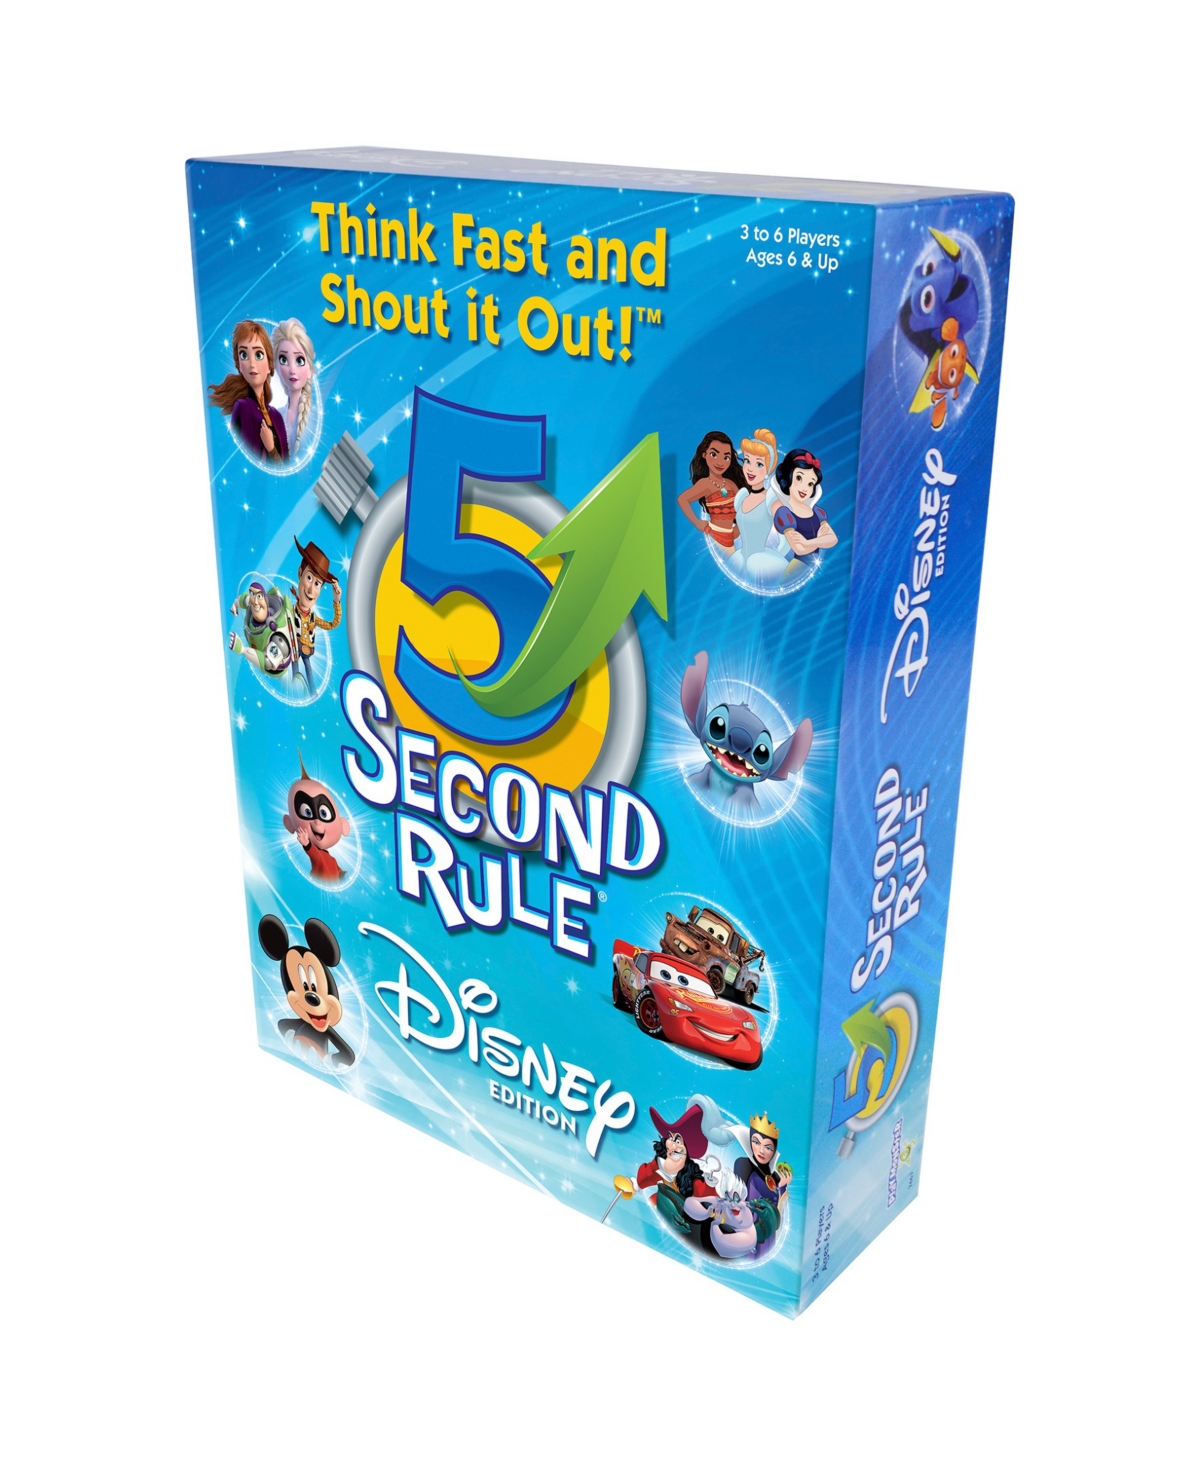 Shop Disney 5 Second Rule  Edition Fun Family Game About Your Favorite  Characters In Multi